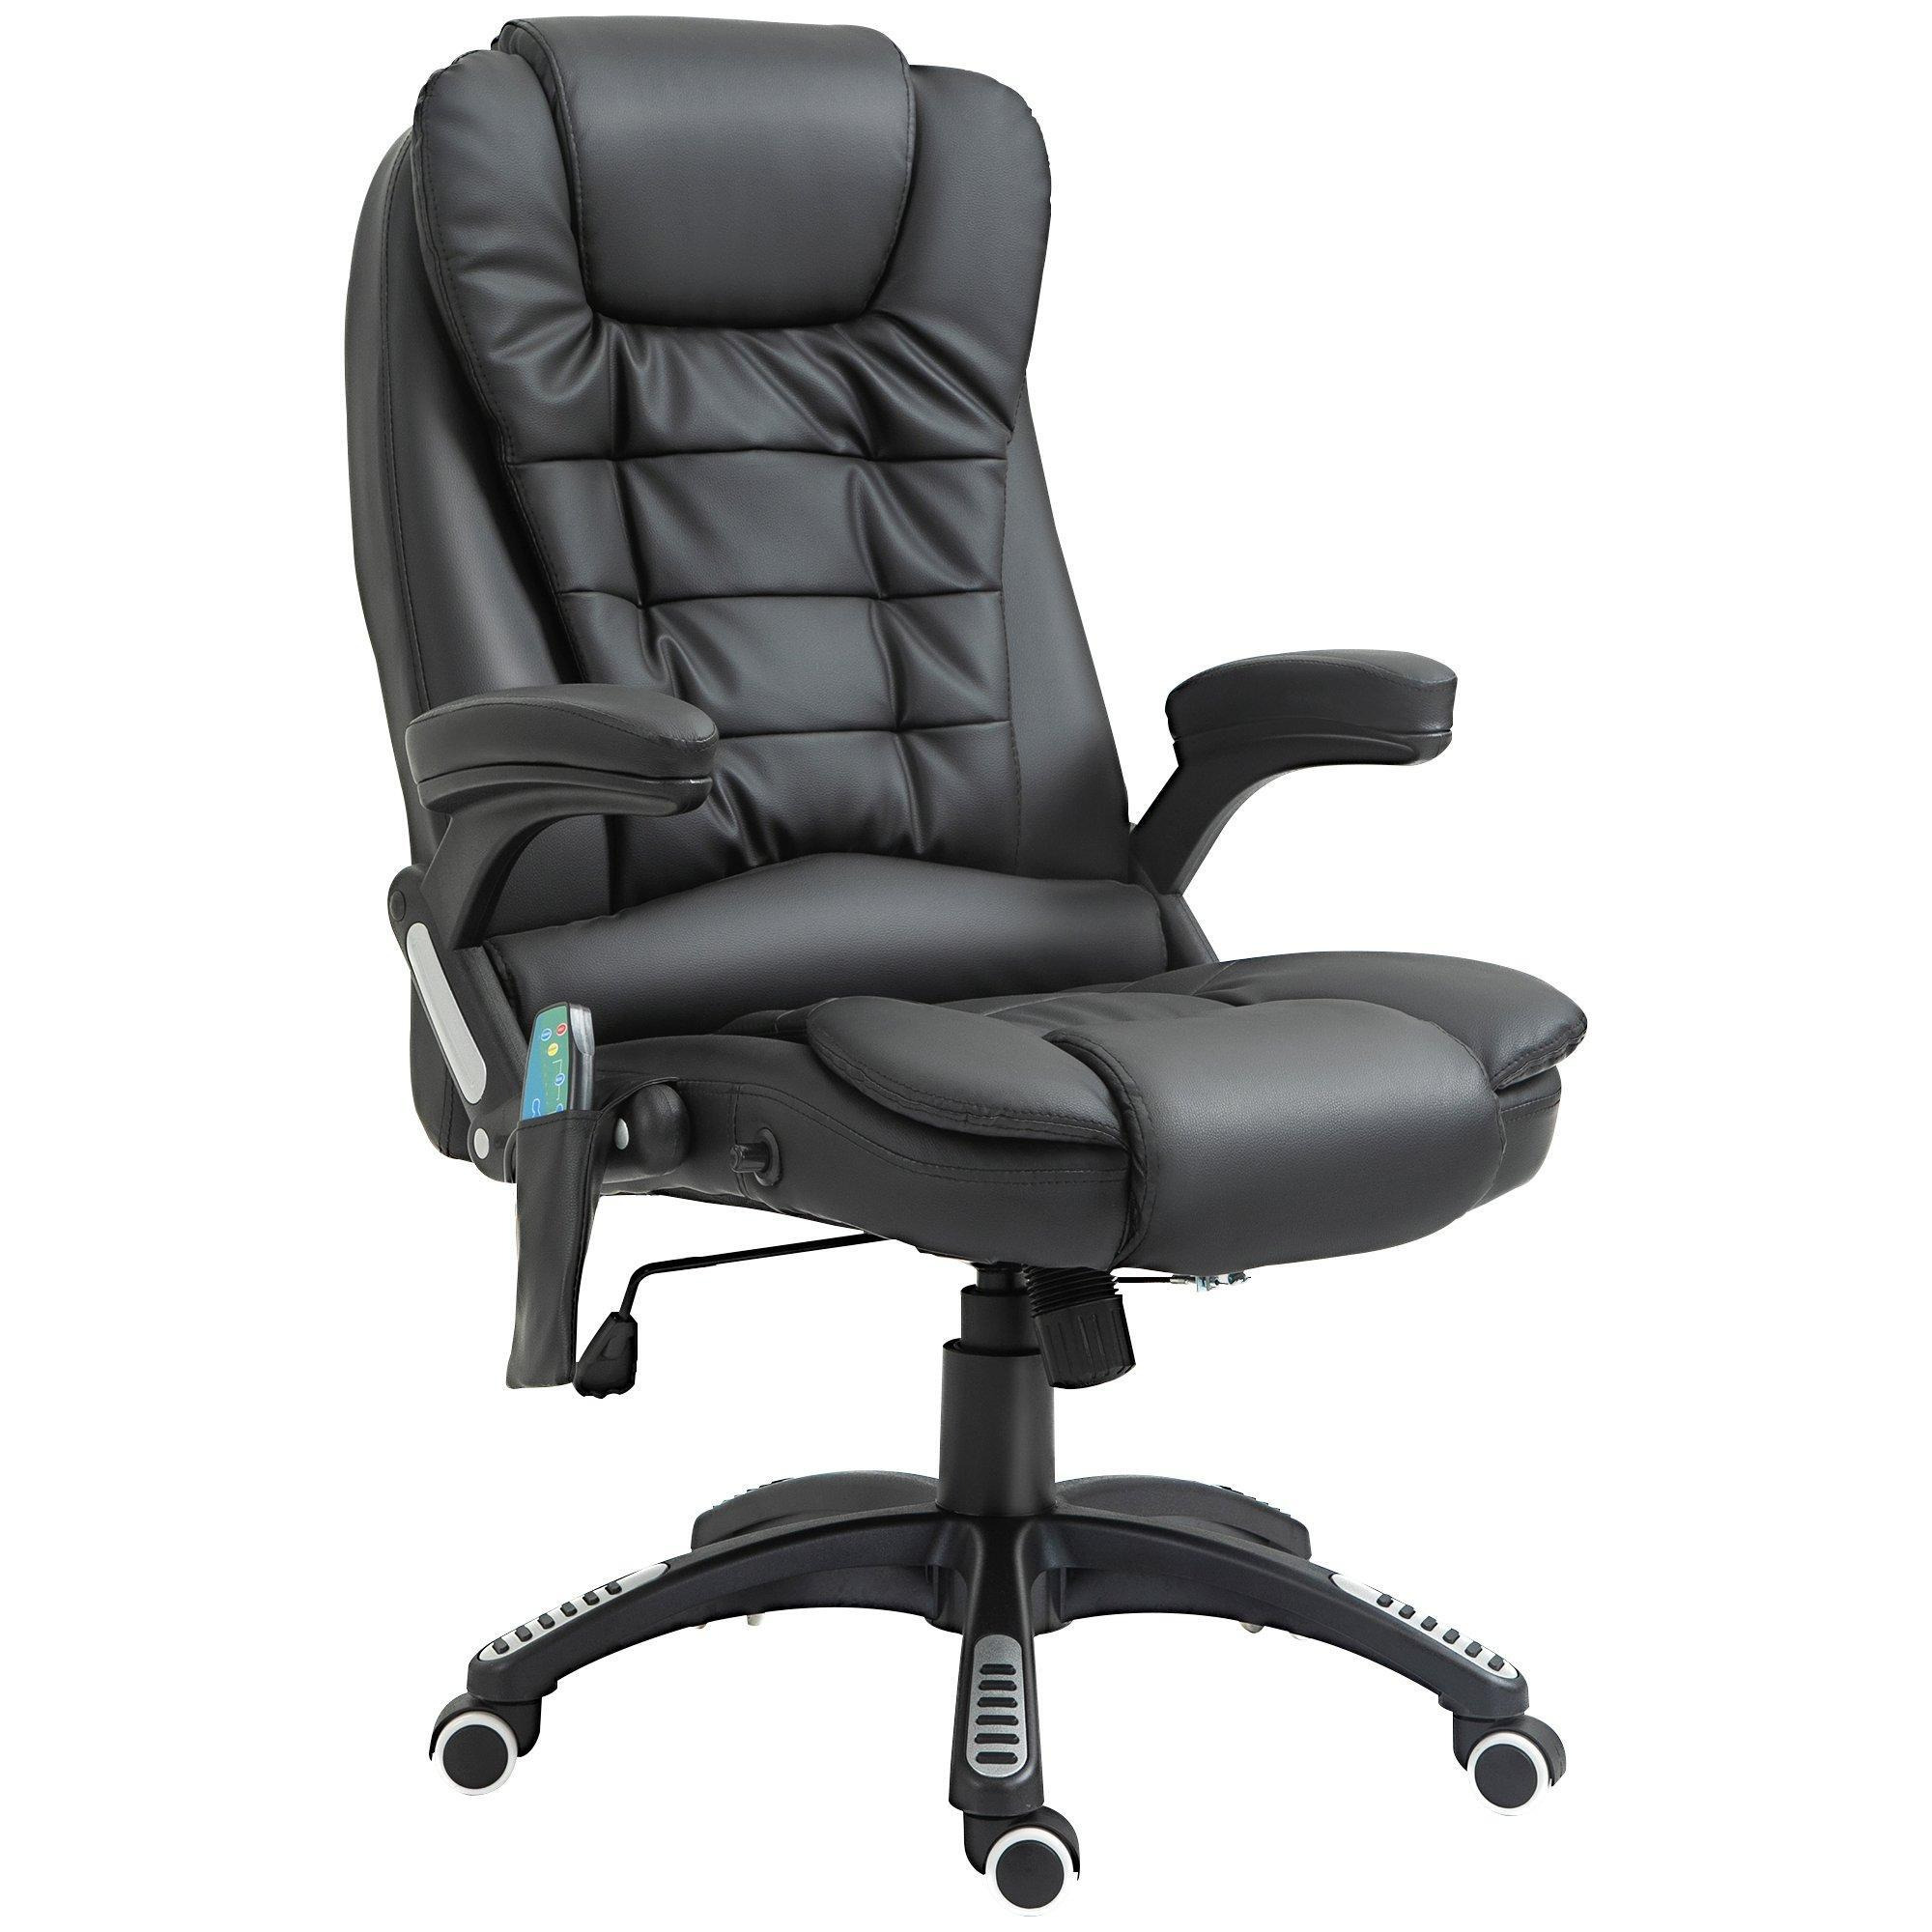 Executive Office Chair with Massage Heat PU Leather Reclining Chair - image 1